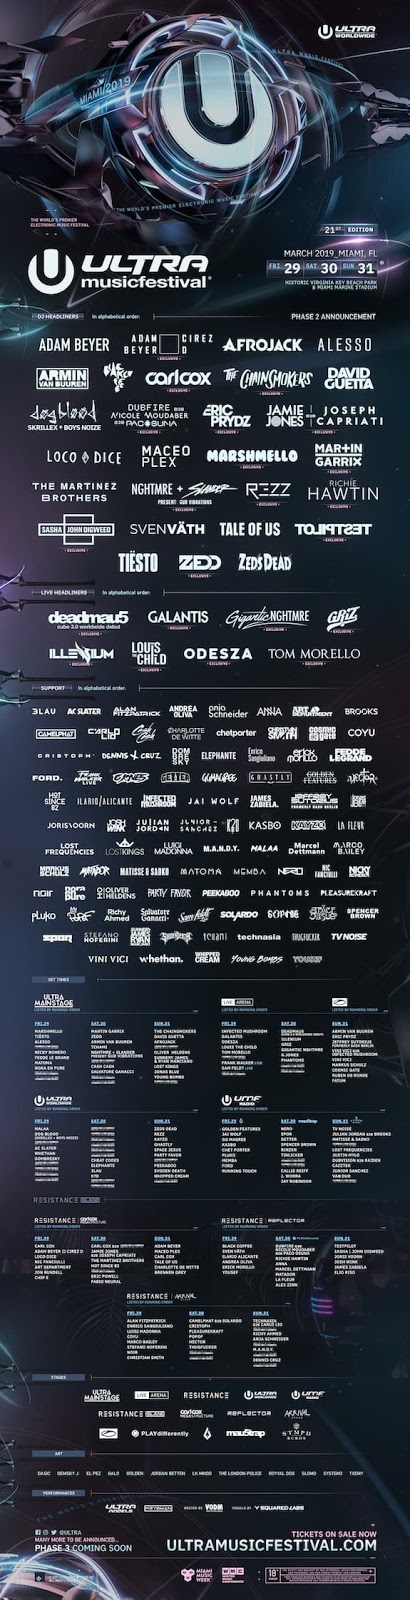 Ultra Music Festival Reveals 2019 Phase Two Lineup